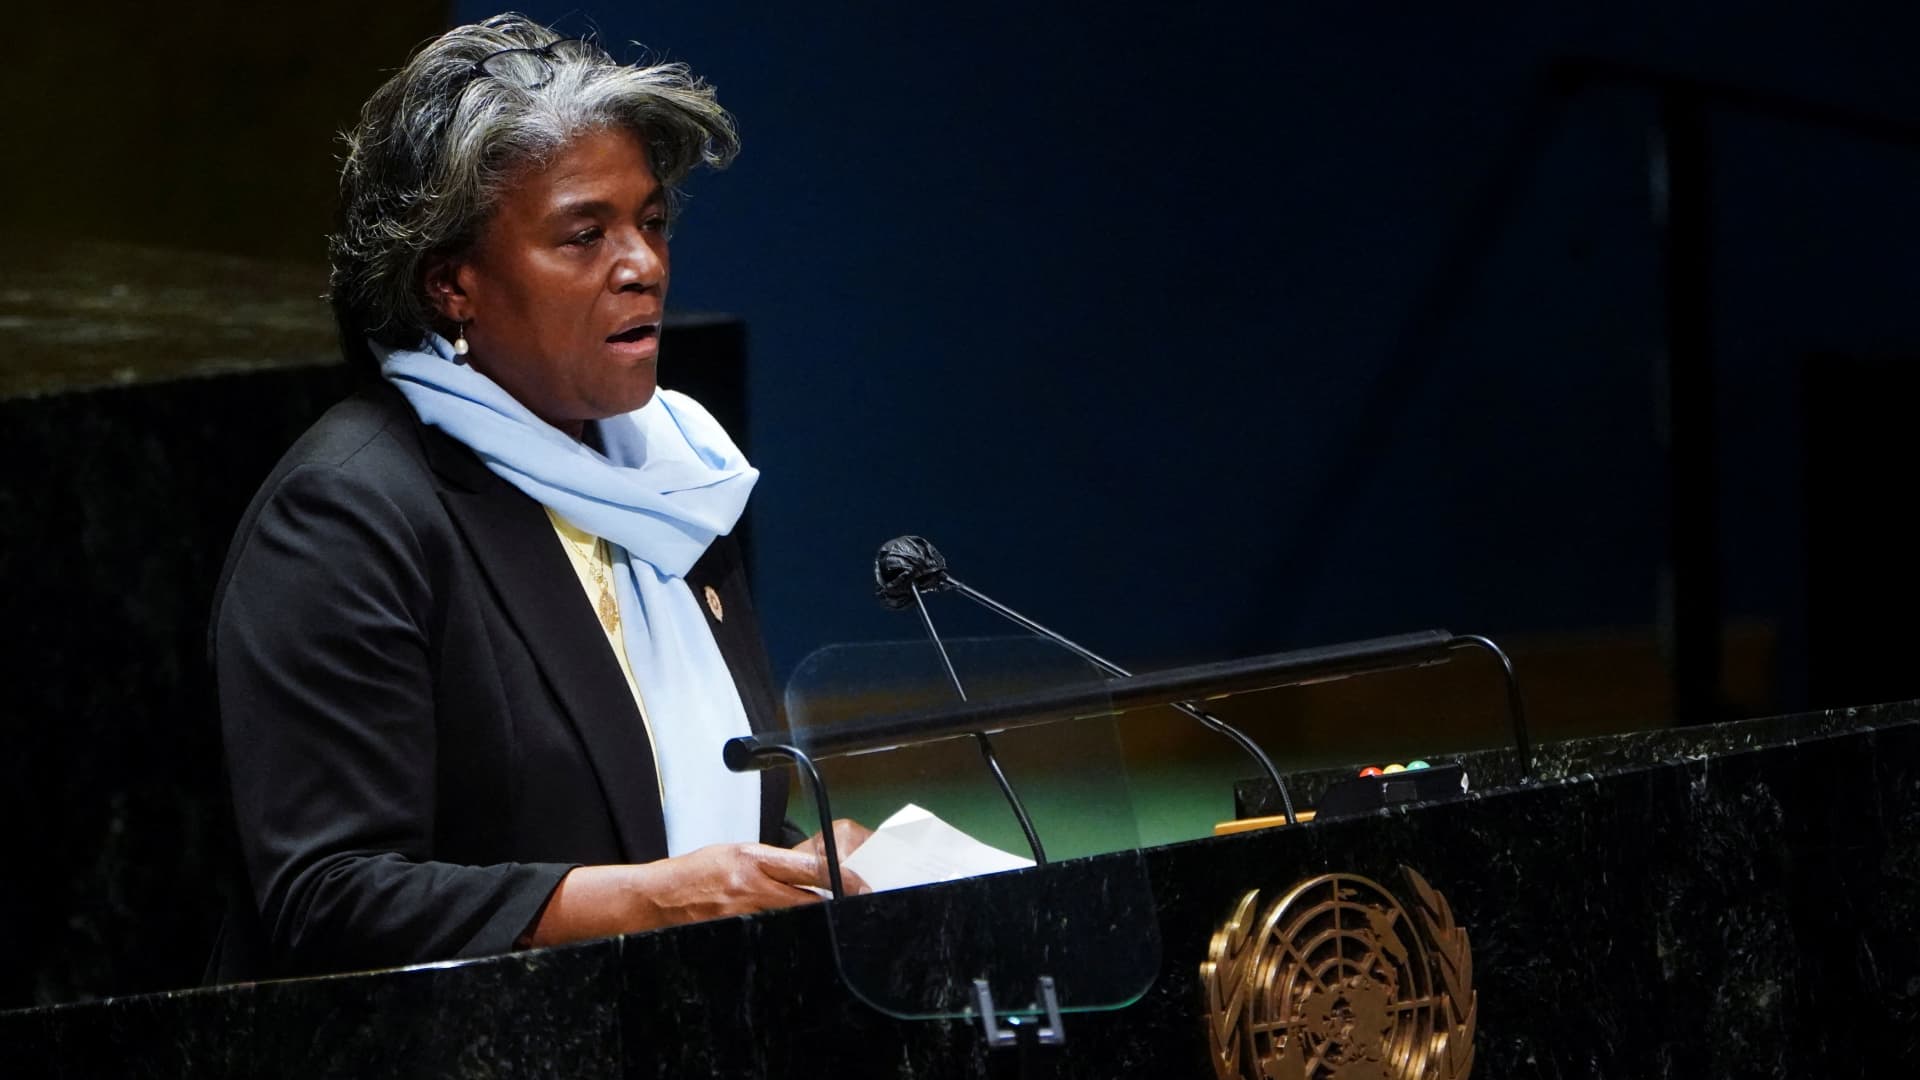 U.S. Ambassador to the UN Linda Thomas-Greenfield speaks at the 11th emergency special session of the 193-member U.N. General Assembly on Russia's invasion of Ukraine, at the United Nations Headquarters in Manhattan, New York City, U.S., March 2, 2022.